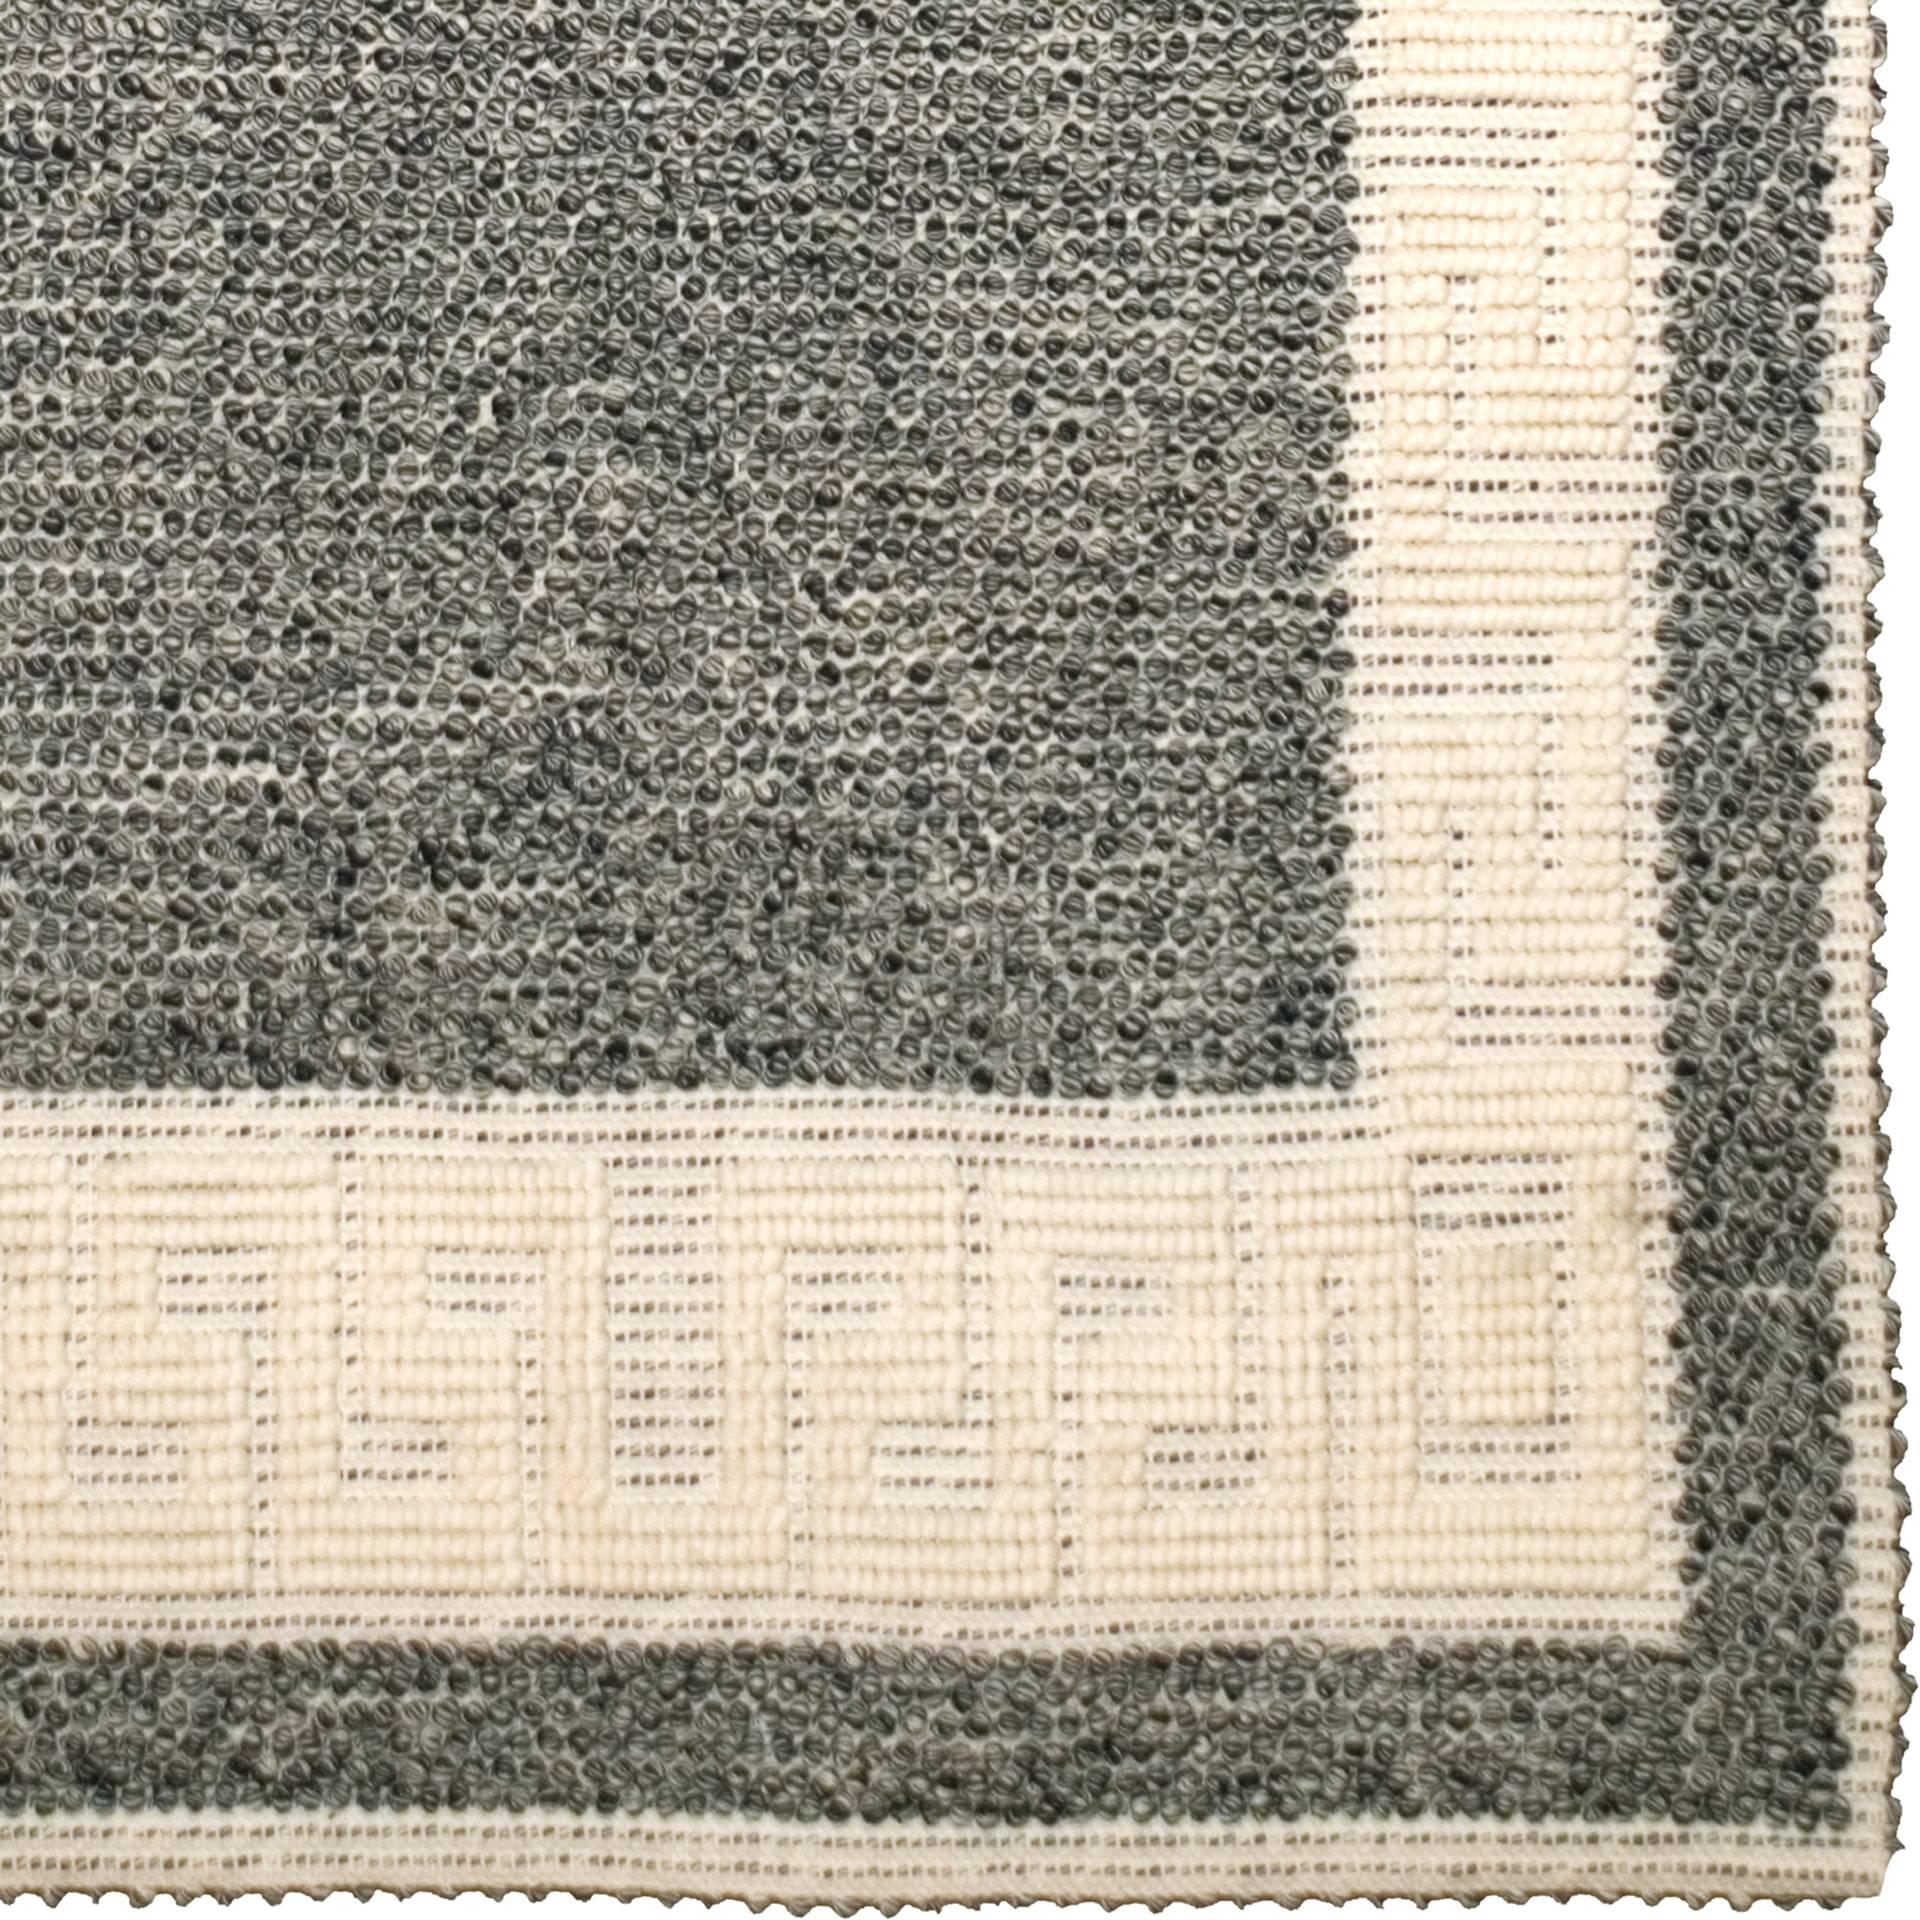 Contemporary Sardinian handwoven carpet
Sardinia, Italy, circa 2009
100% white and melange blue cotton

This handwoven textile is created with a rice stitch creating Roman or Greek motif. It embodies the ancient and handcrafted artistic